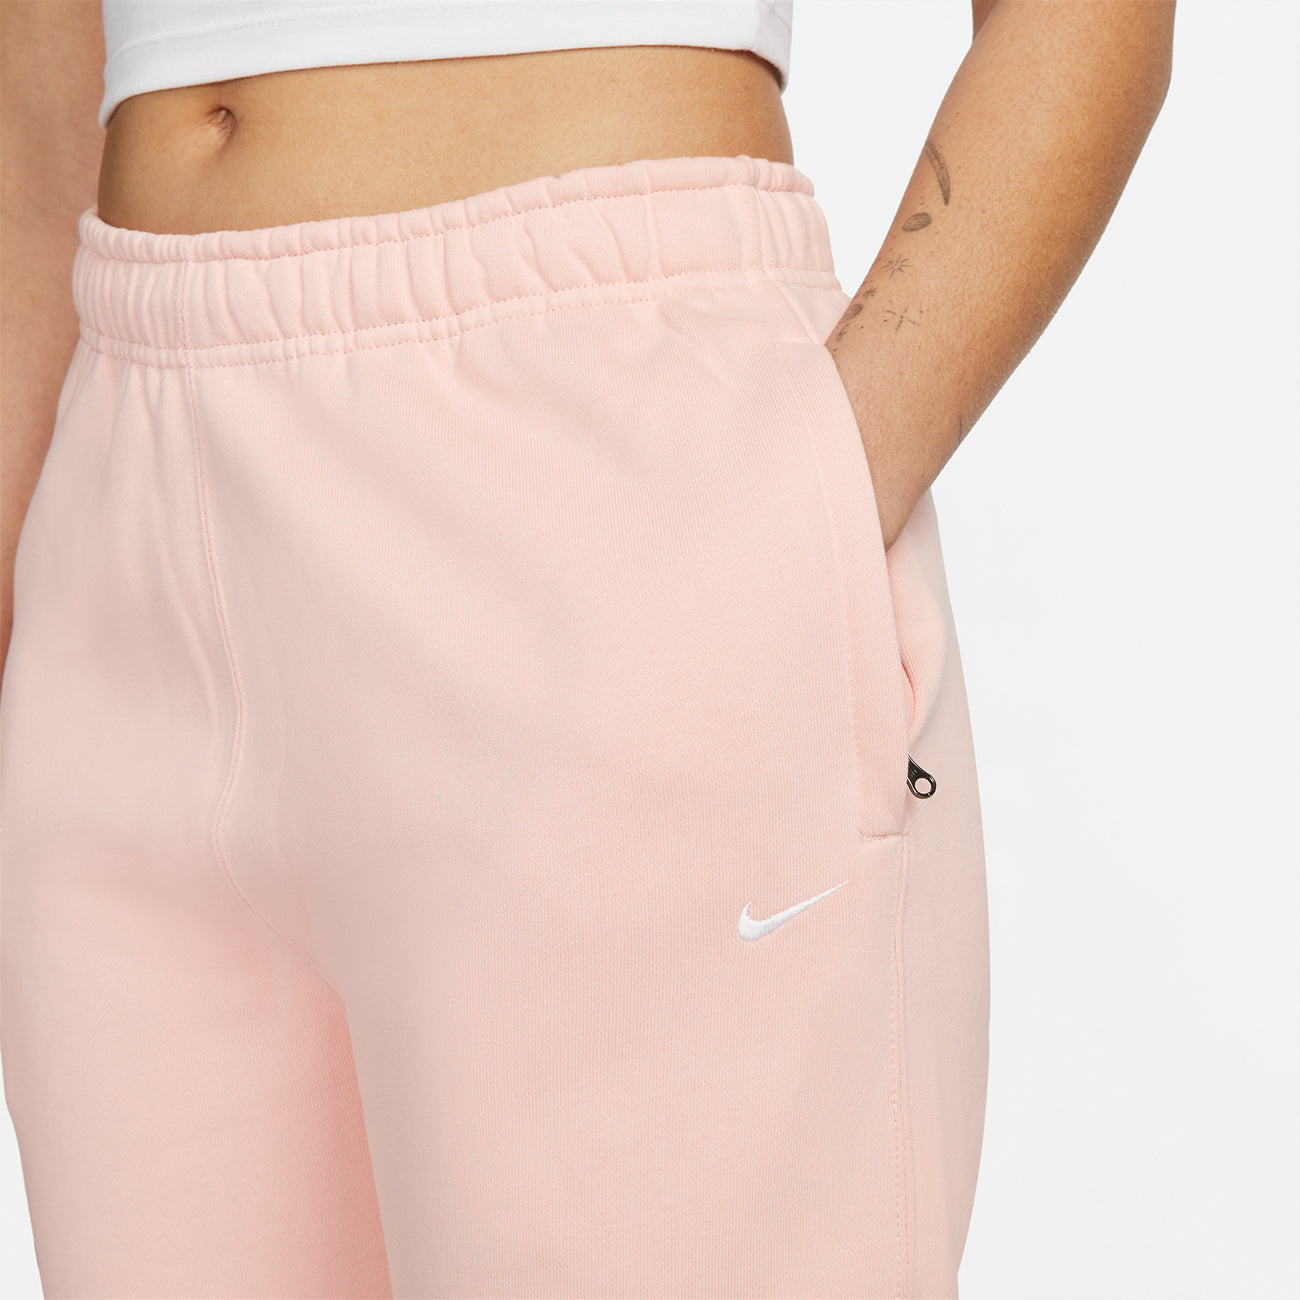 Women's Soloswoosh Fleece Pant - Bleached Coral/White